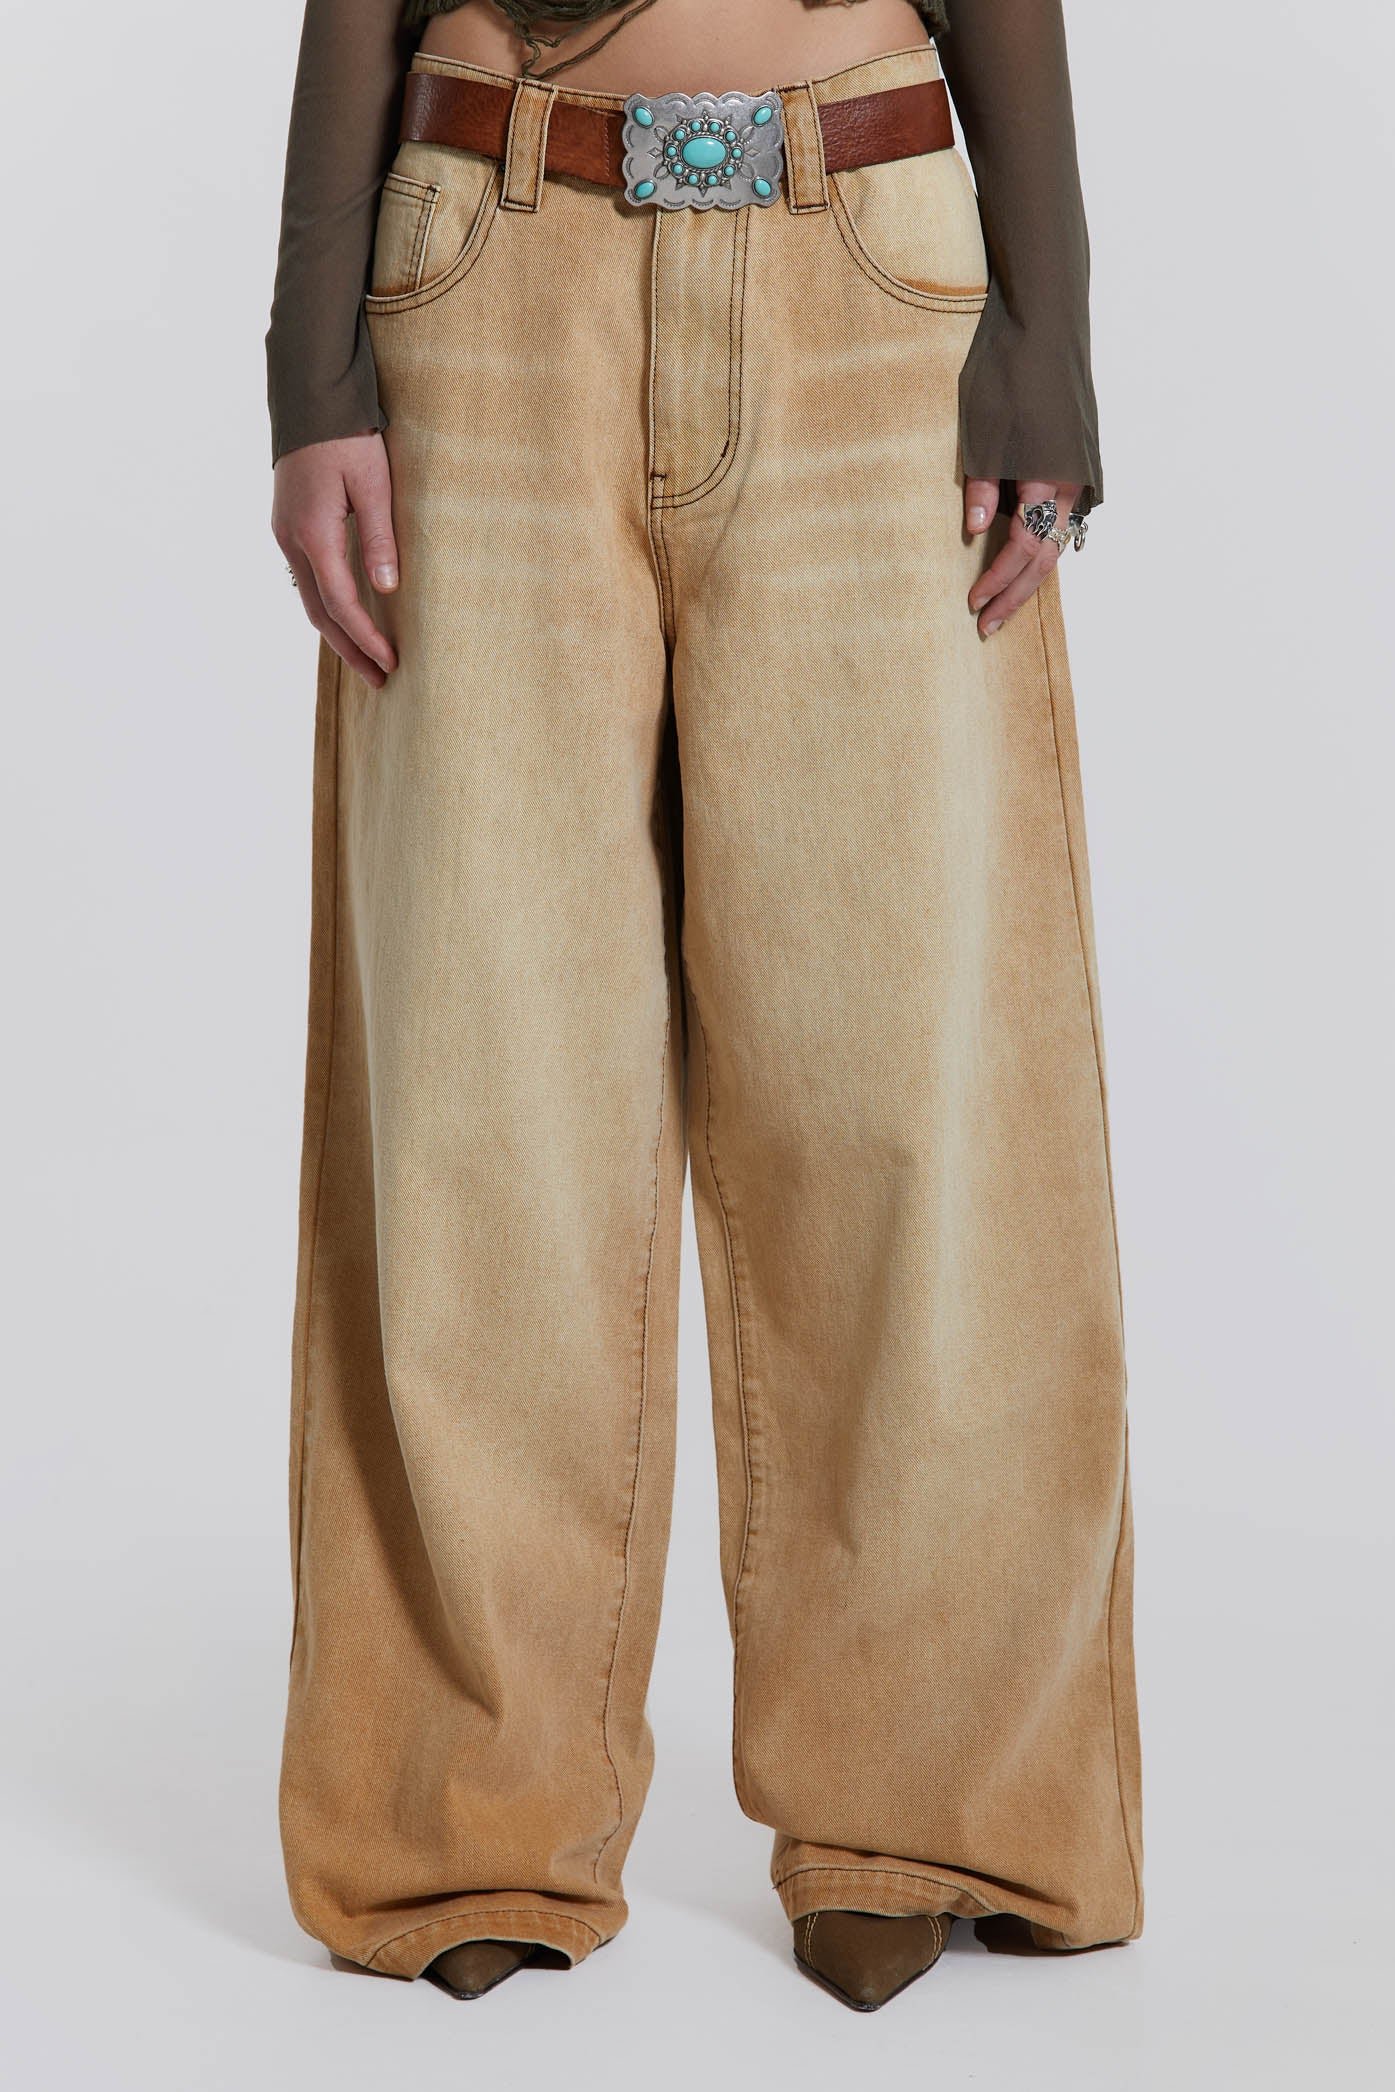 Sand Colossus Jeans | Jaded London